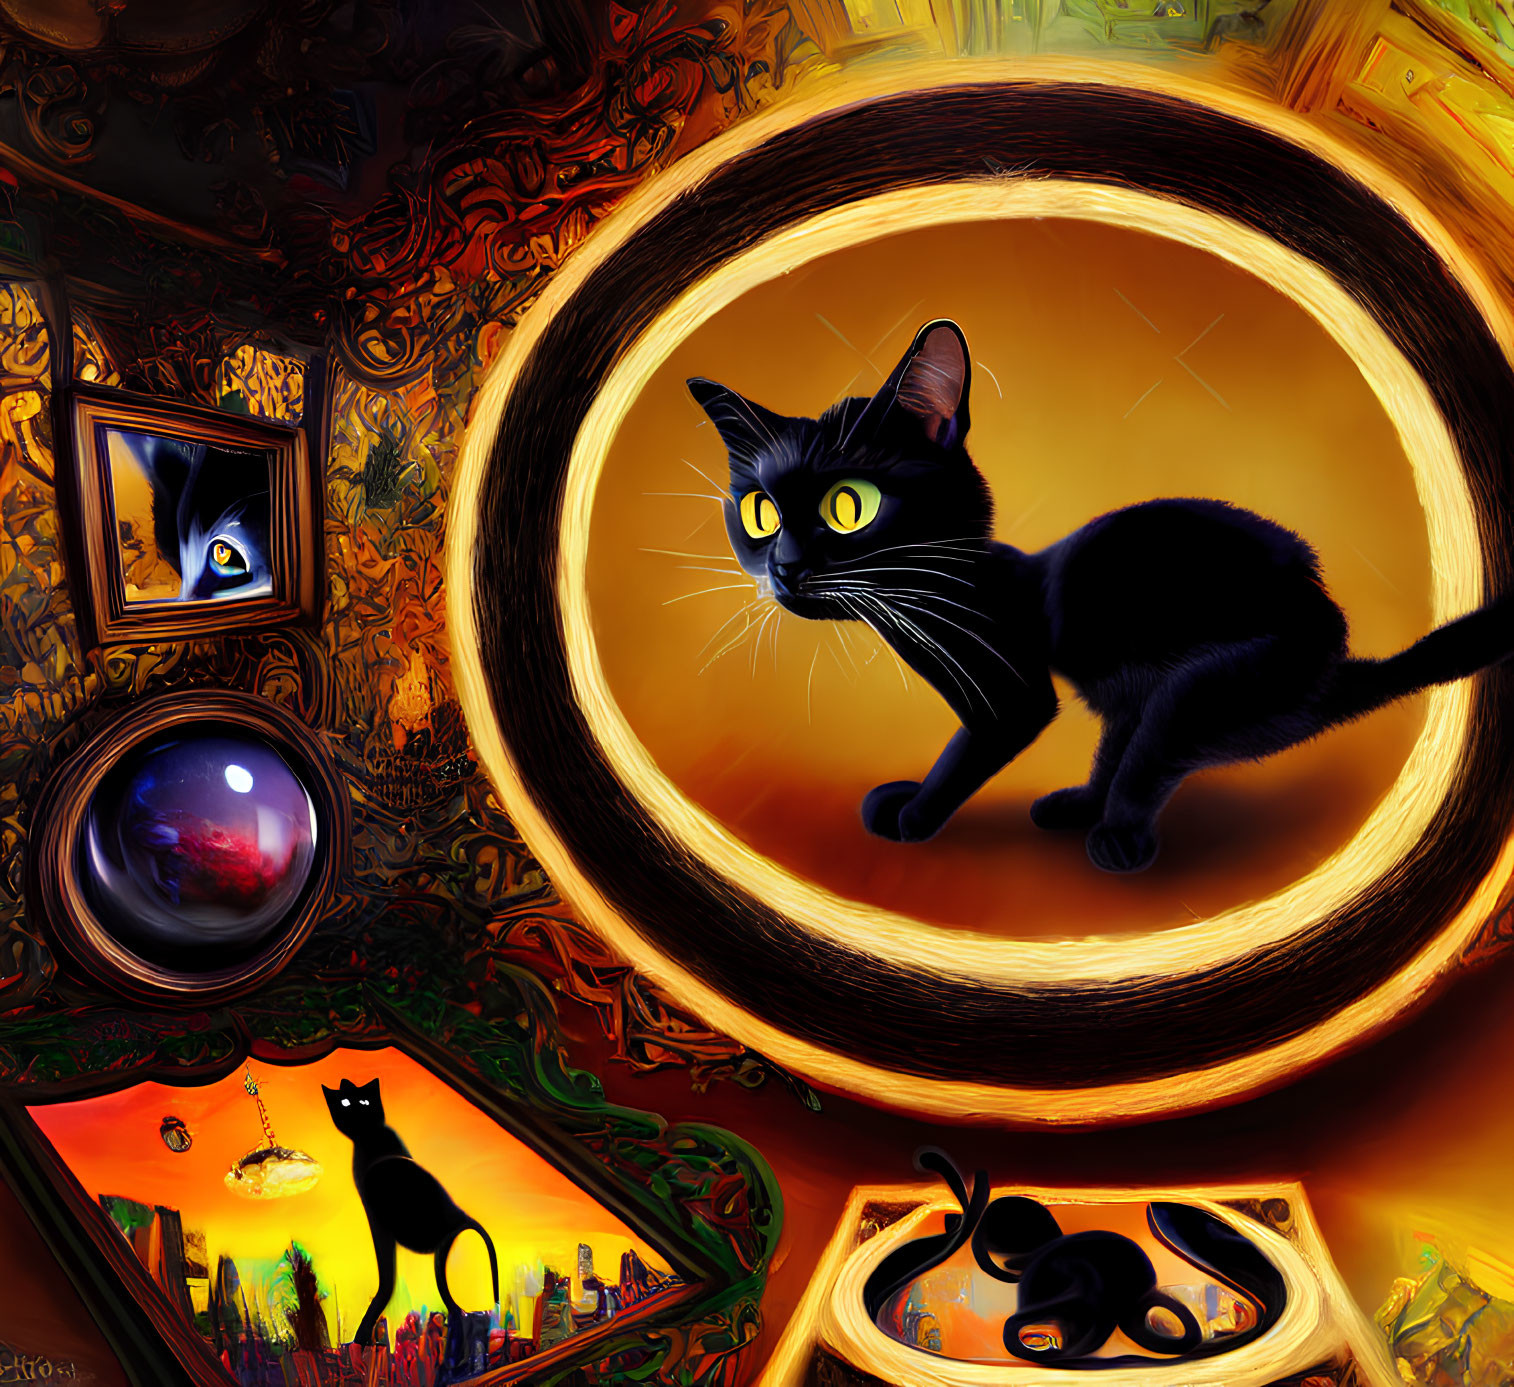 Black cat surrounded by surreal and colorful imagery